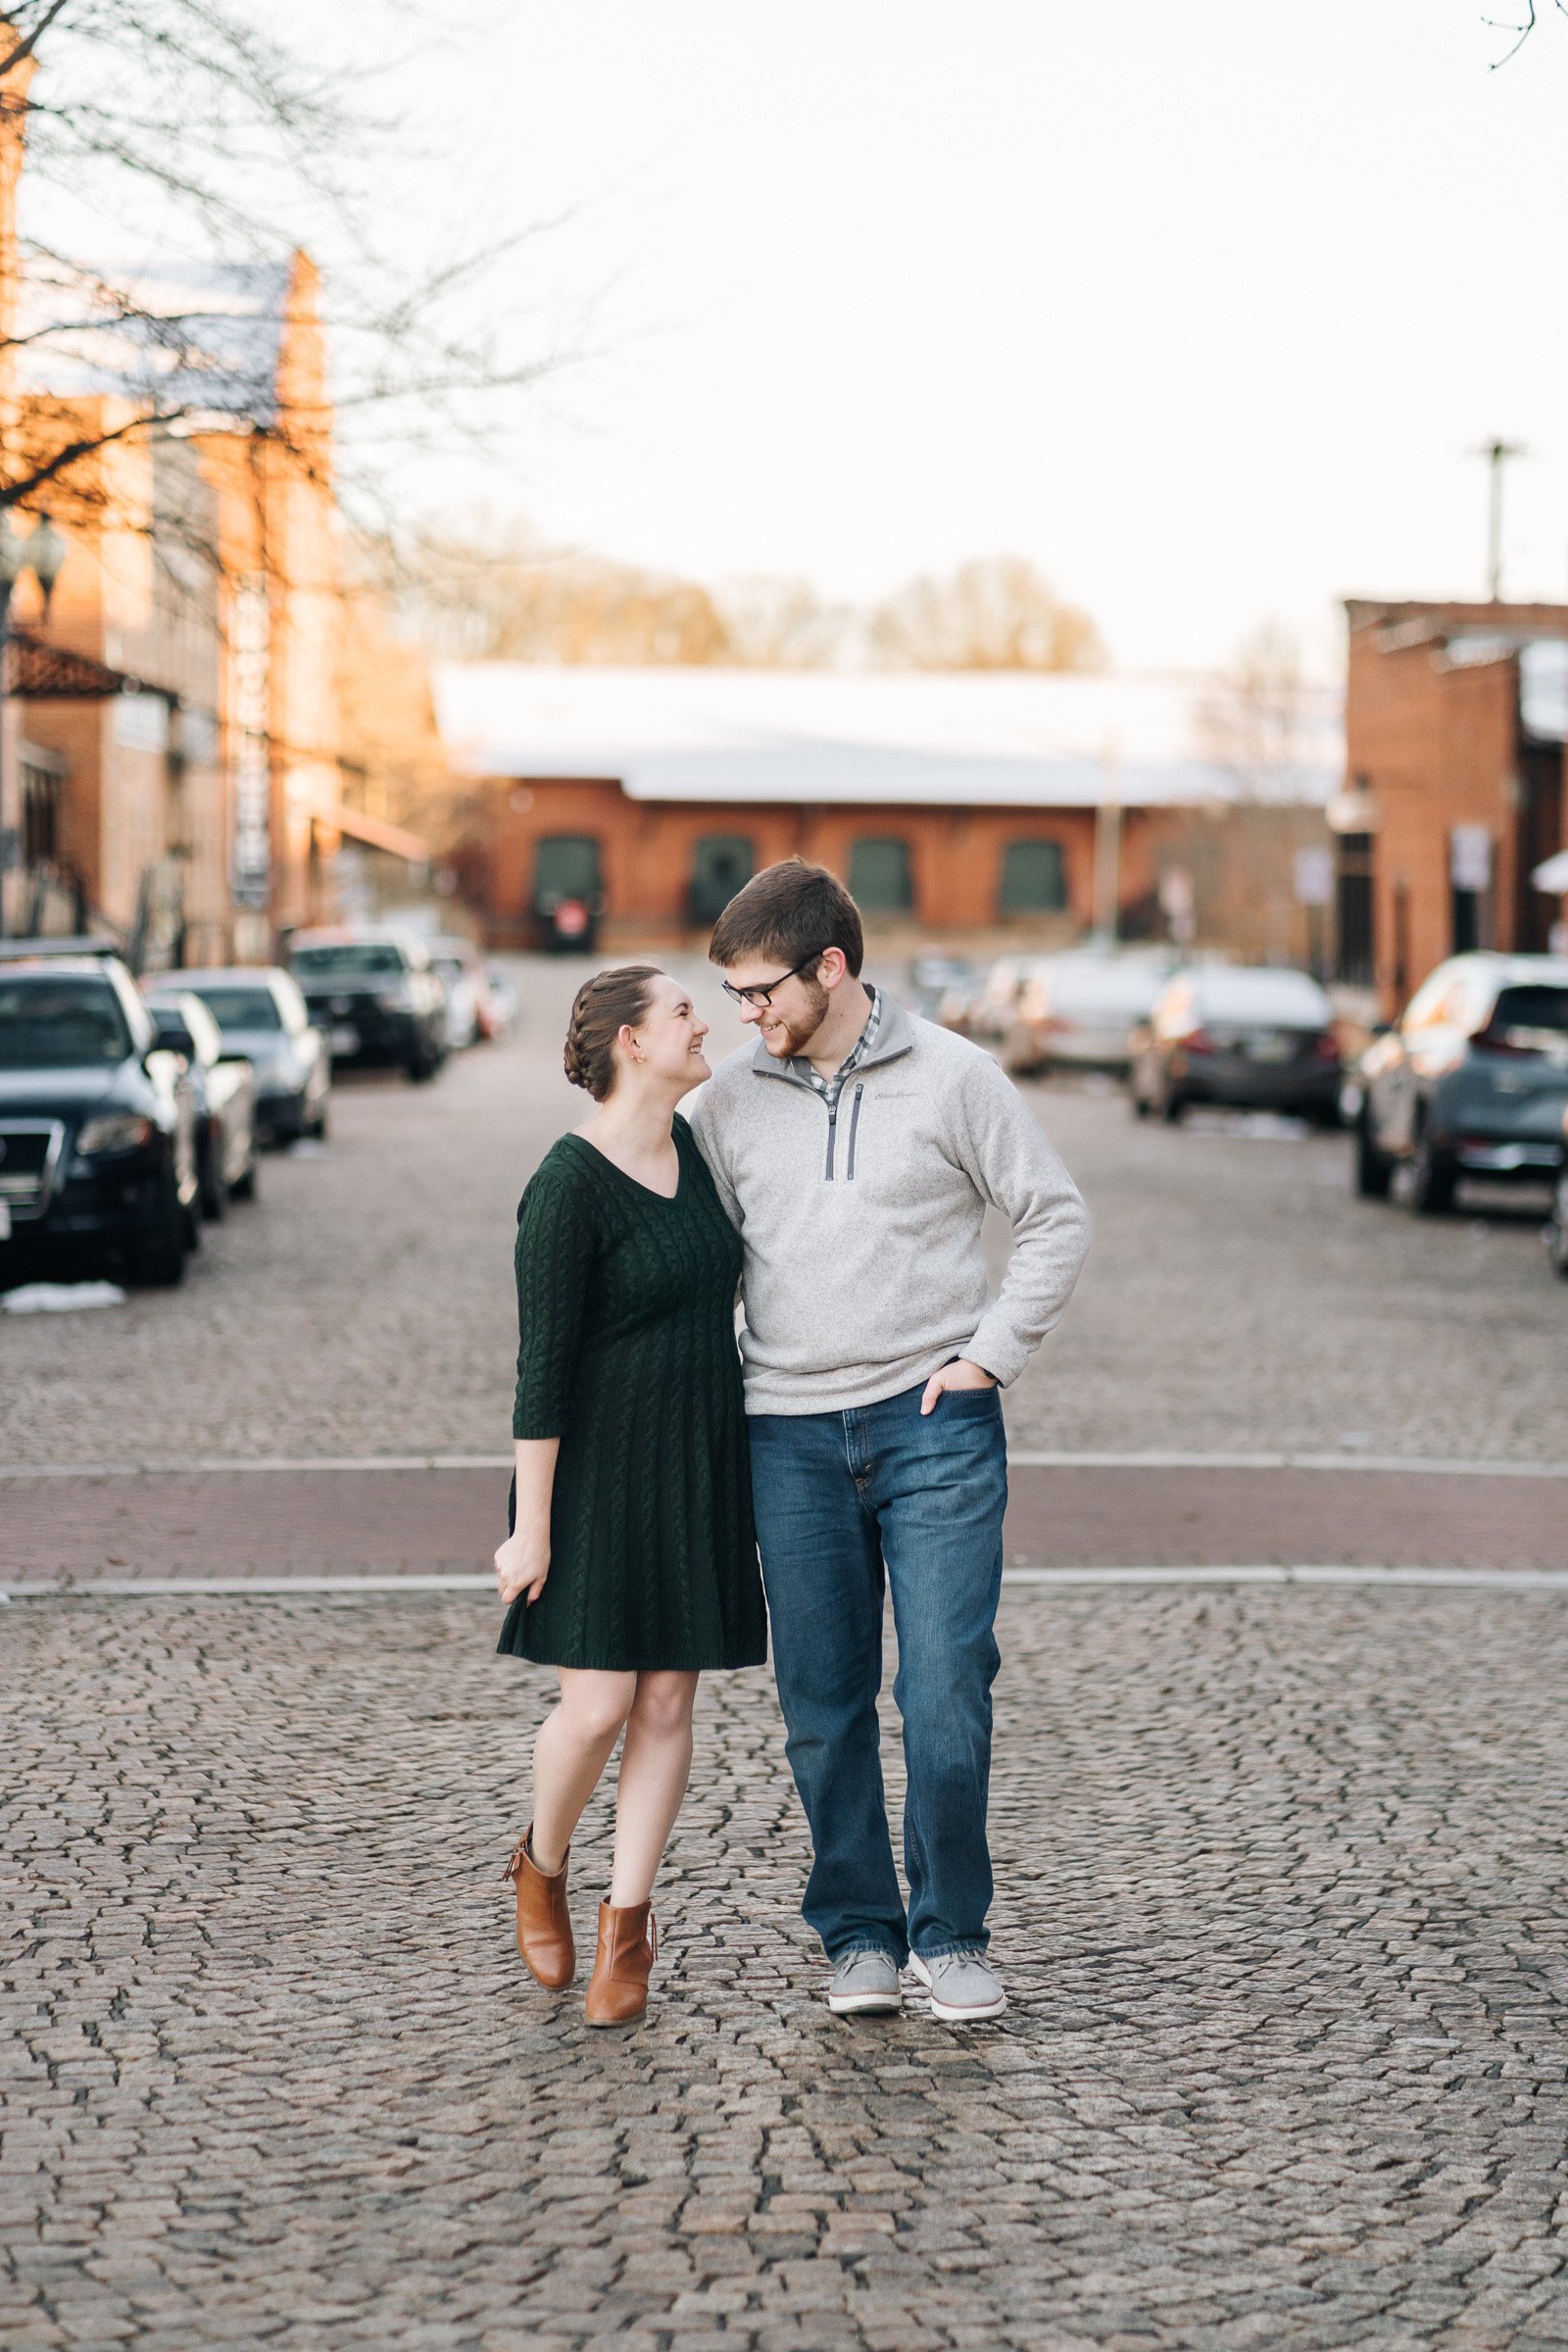 jameson-anna-engagement-session-downtown-danville-river-district-virginia-by-jonathan-hannah-photography-24.jpg